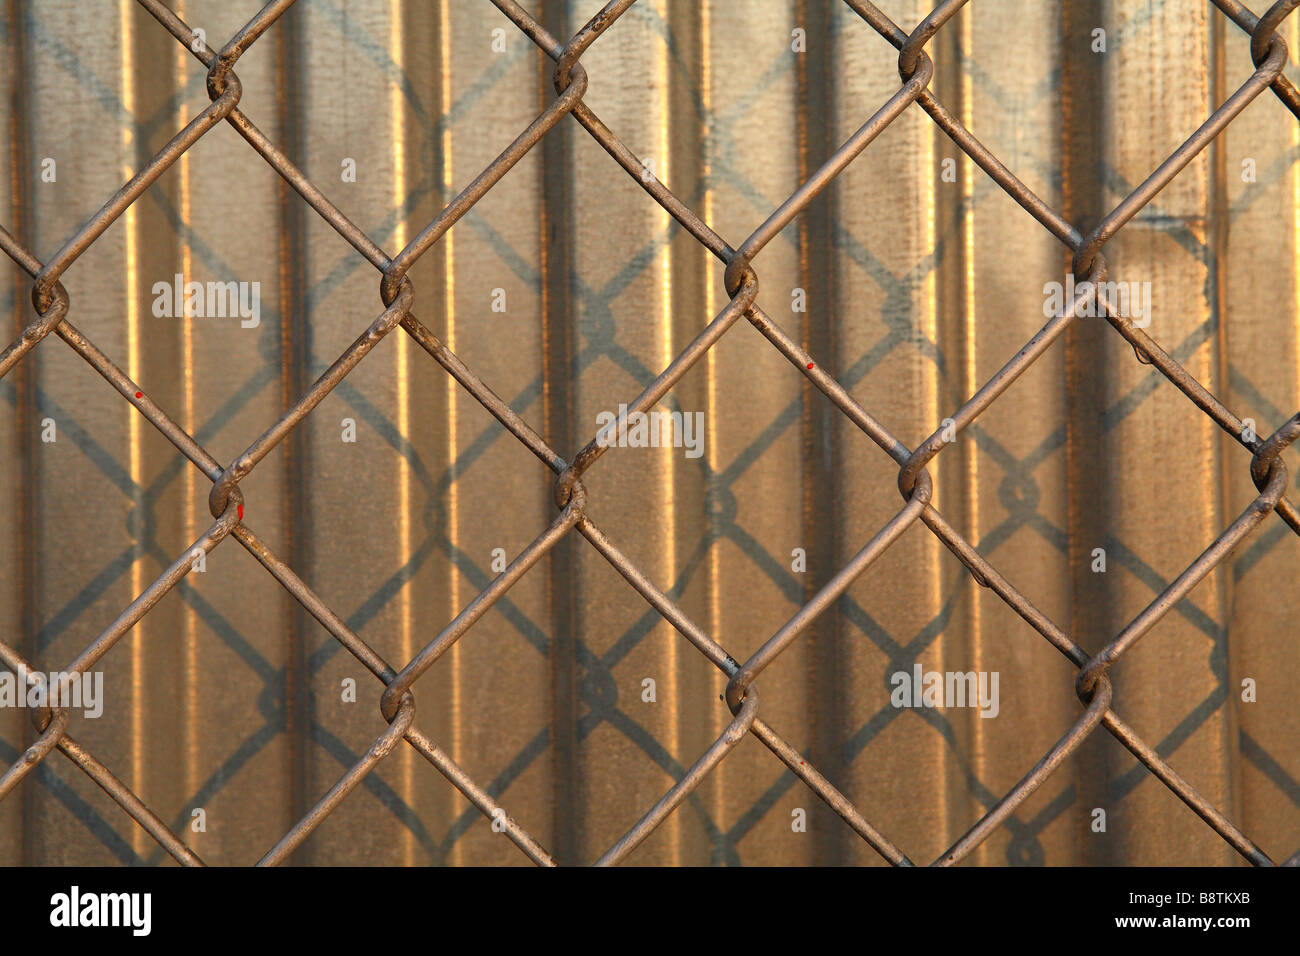 Fence and Corrugated Steel Barrier Stock Photo